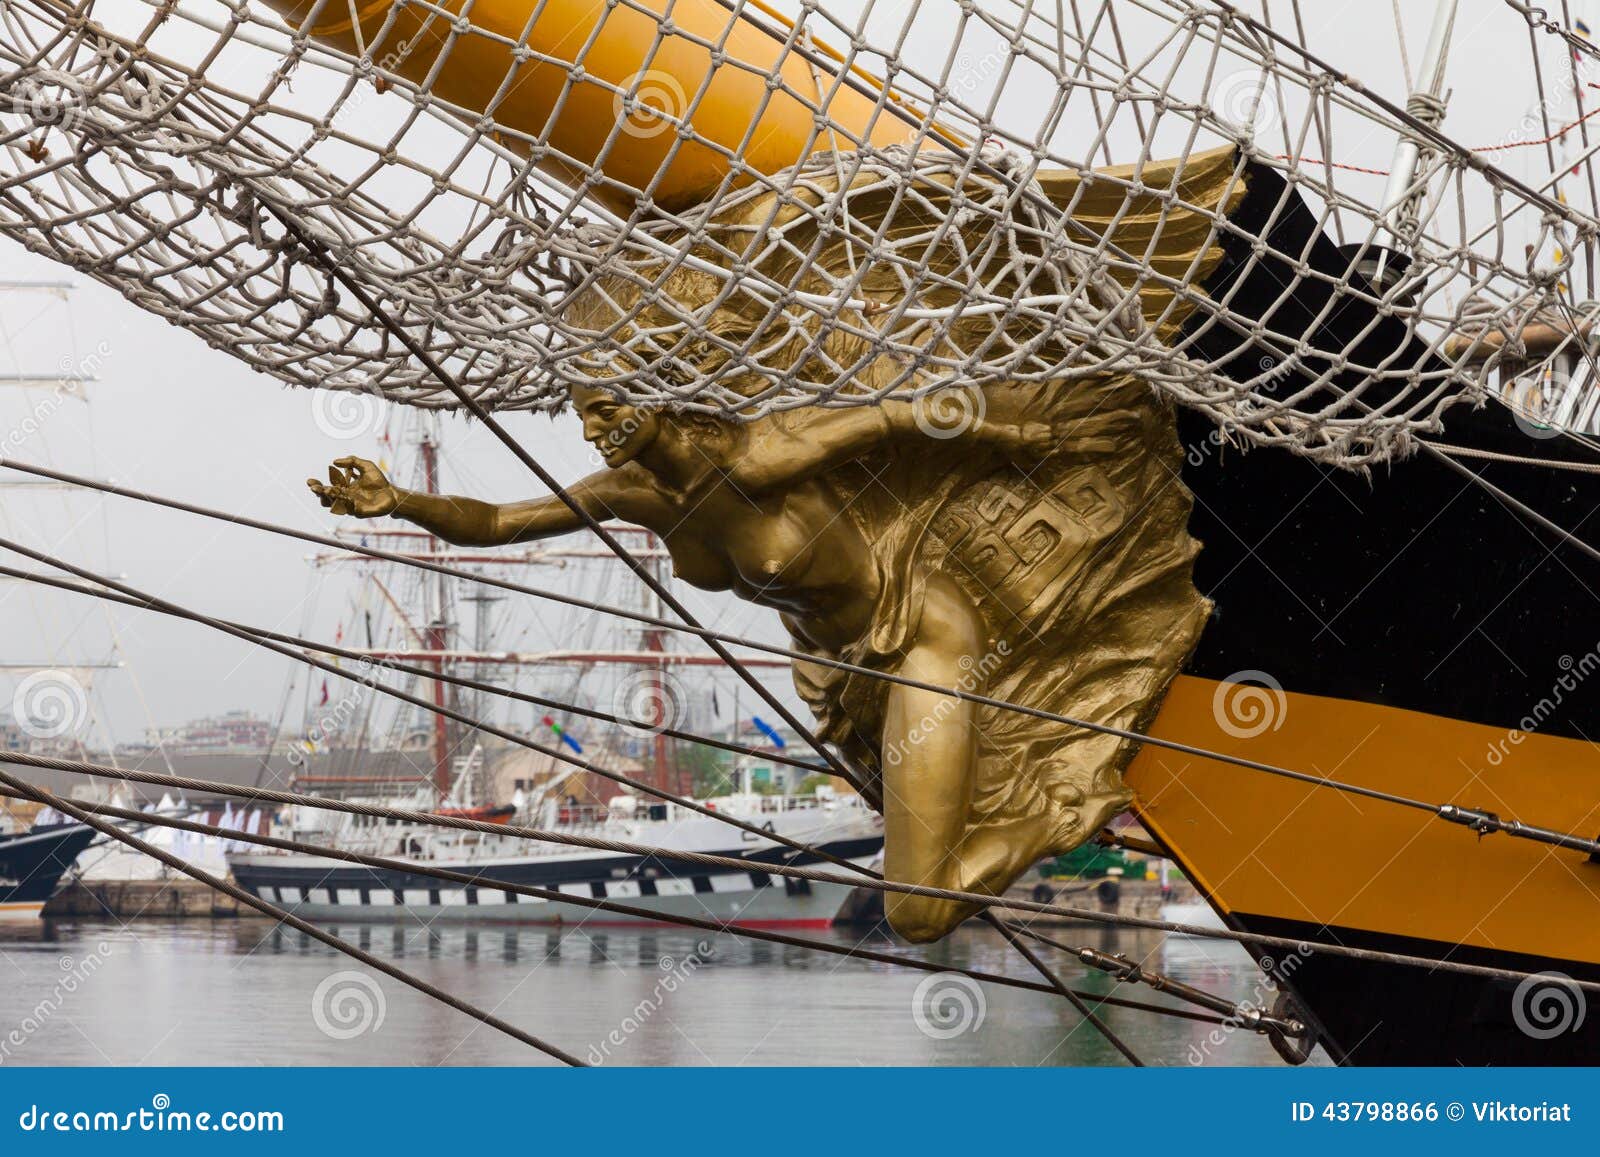 Golden Statue On The Bow Of A Ship Stock Photo - Image of 